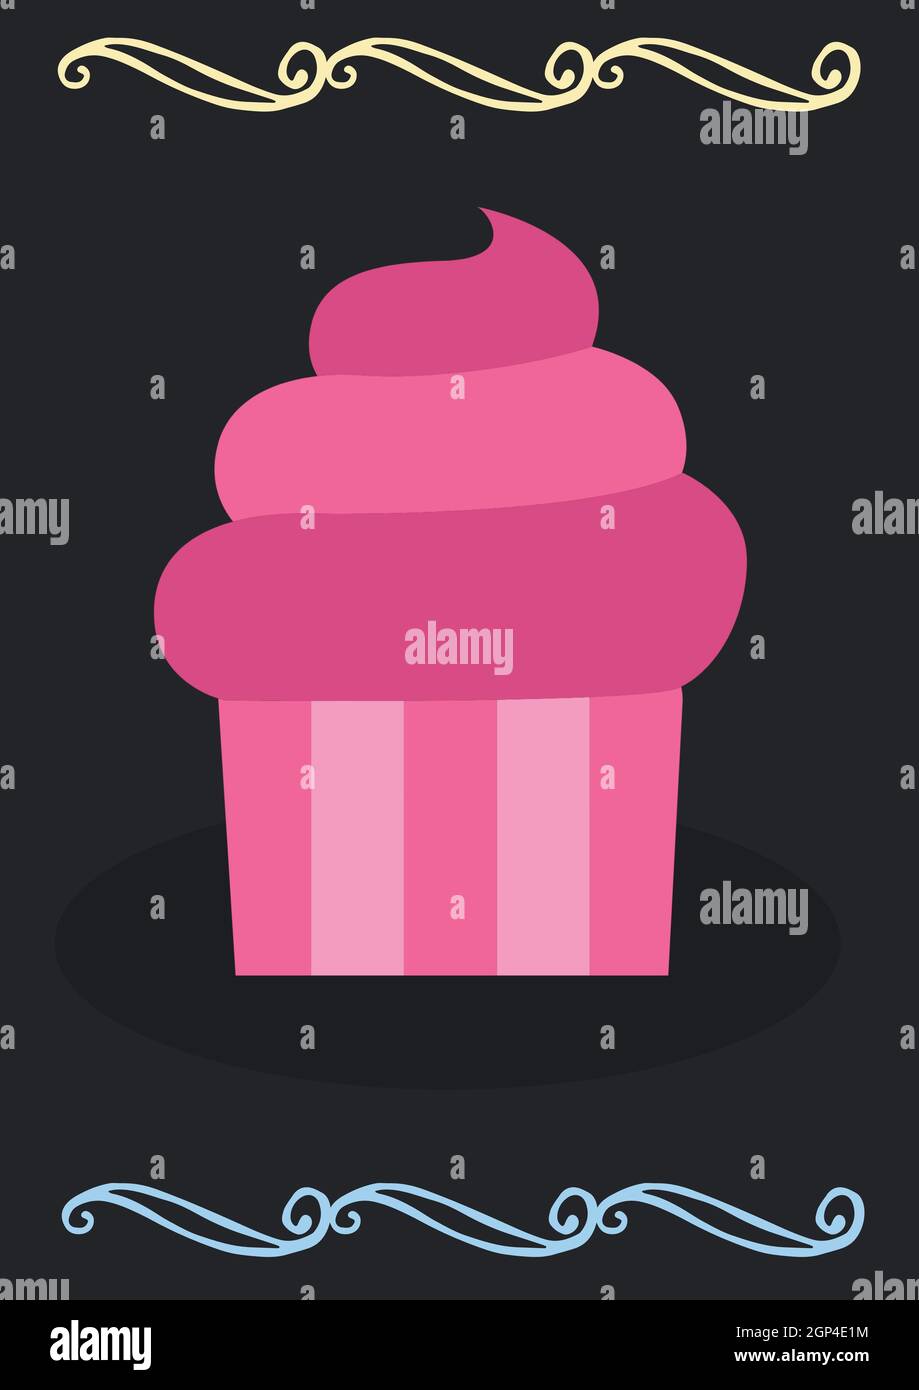 Composition of pink cupcake icon on black background Stock Photo